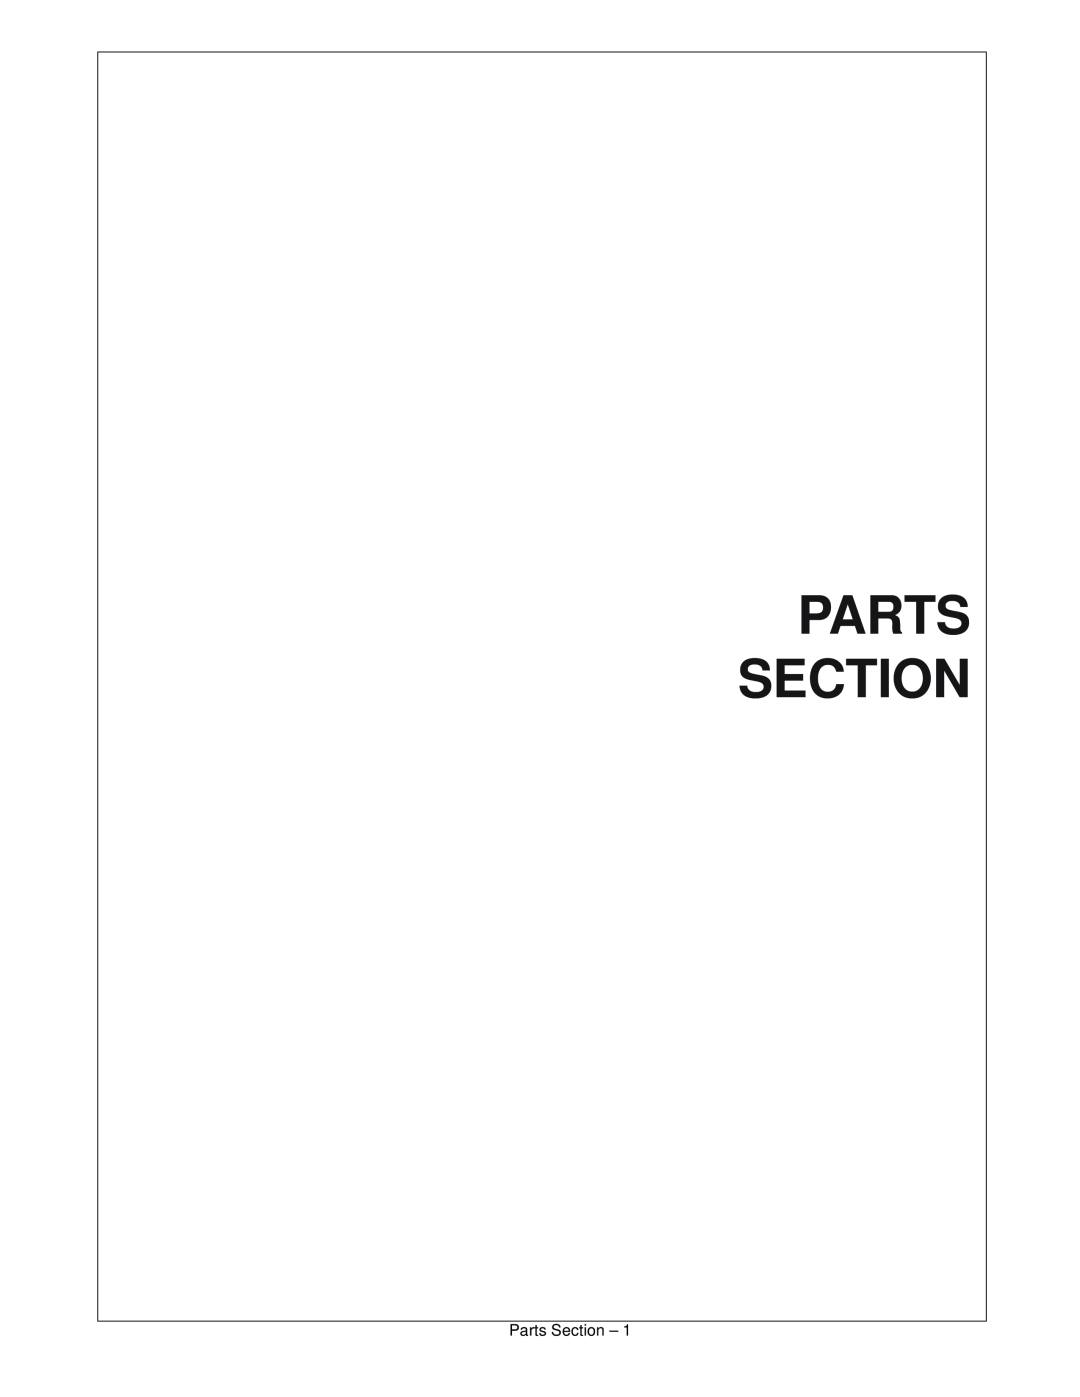 Servis-Rhino SE4 manual Parts Section 